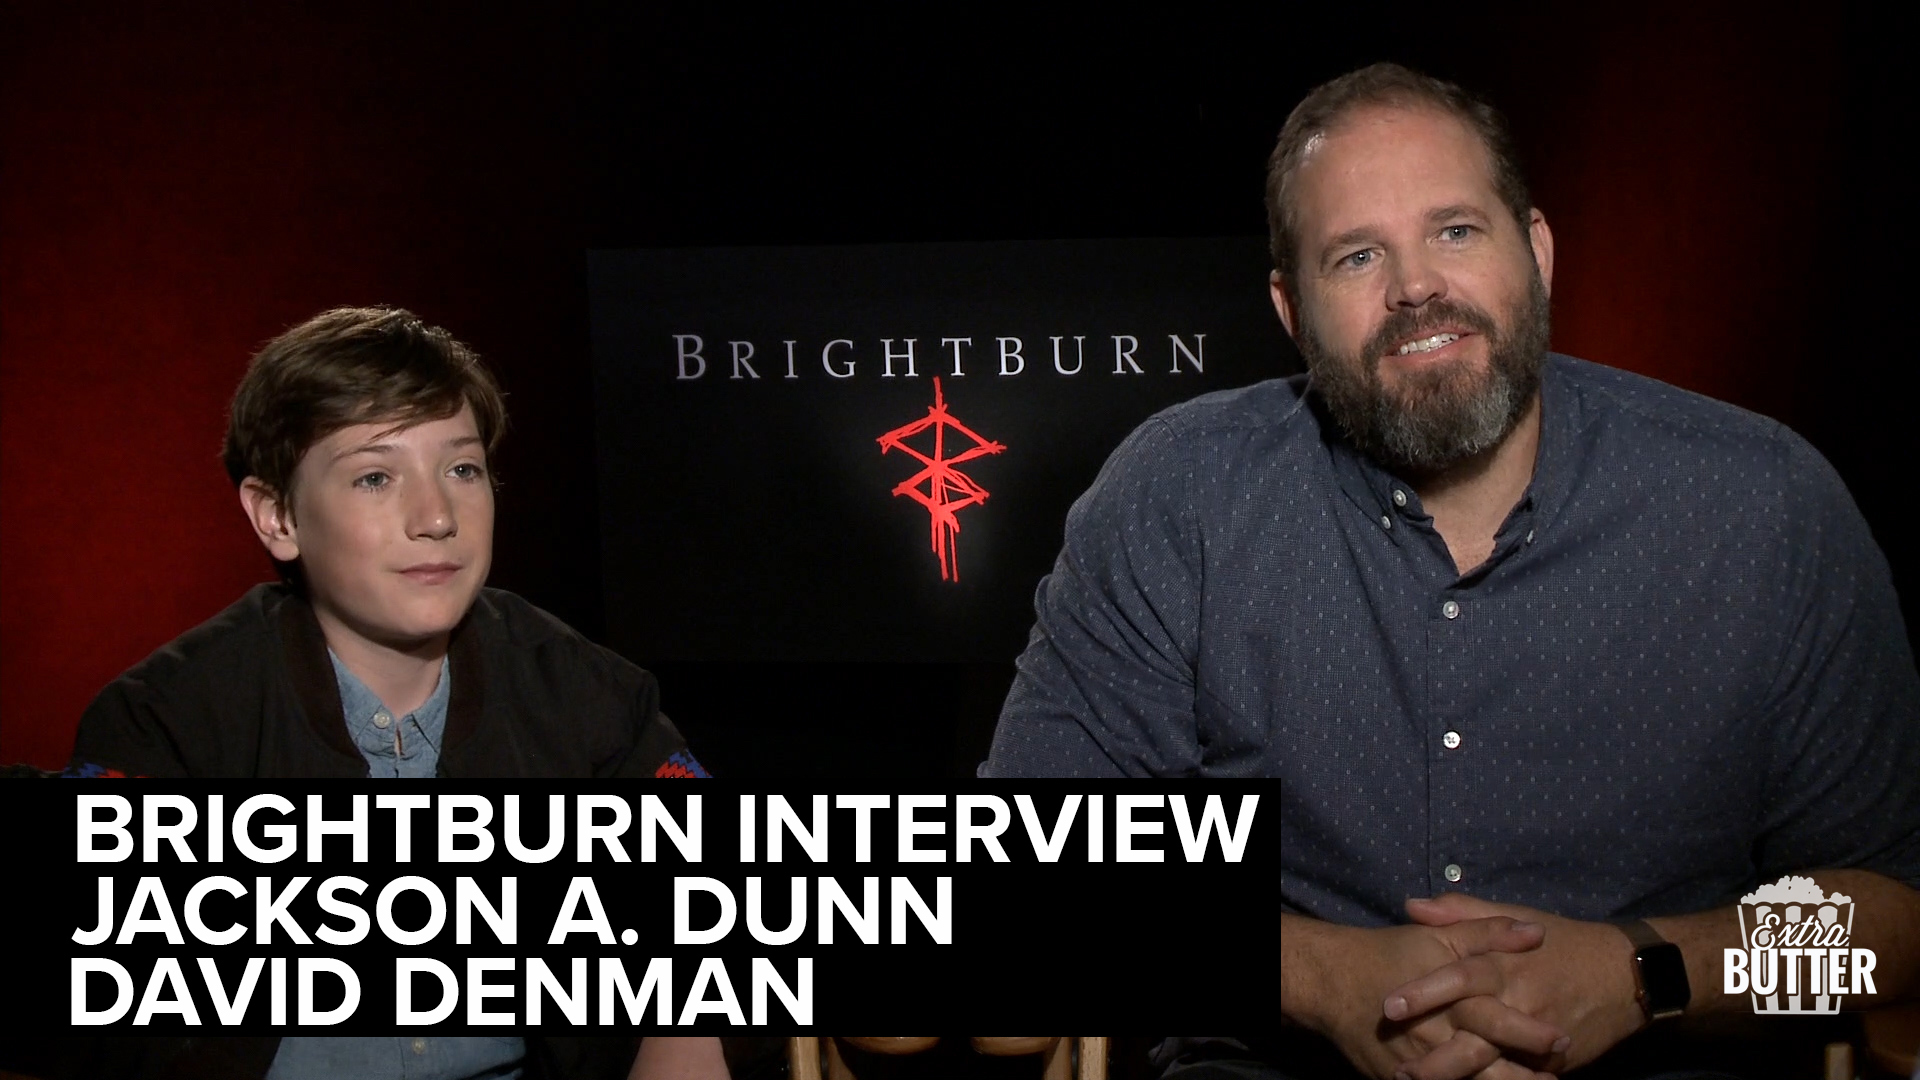 'Brightburn' - the superhero horror movie - is so effective, Mark S. Allen feels uncomfortable even being in the room to interview Jackson A. Dunn.